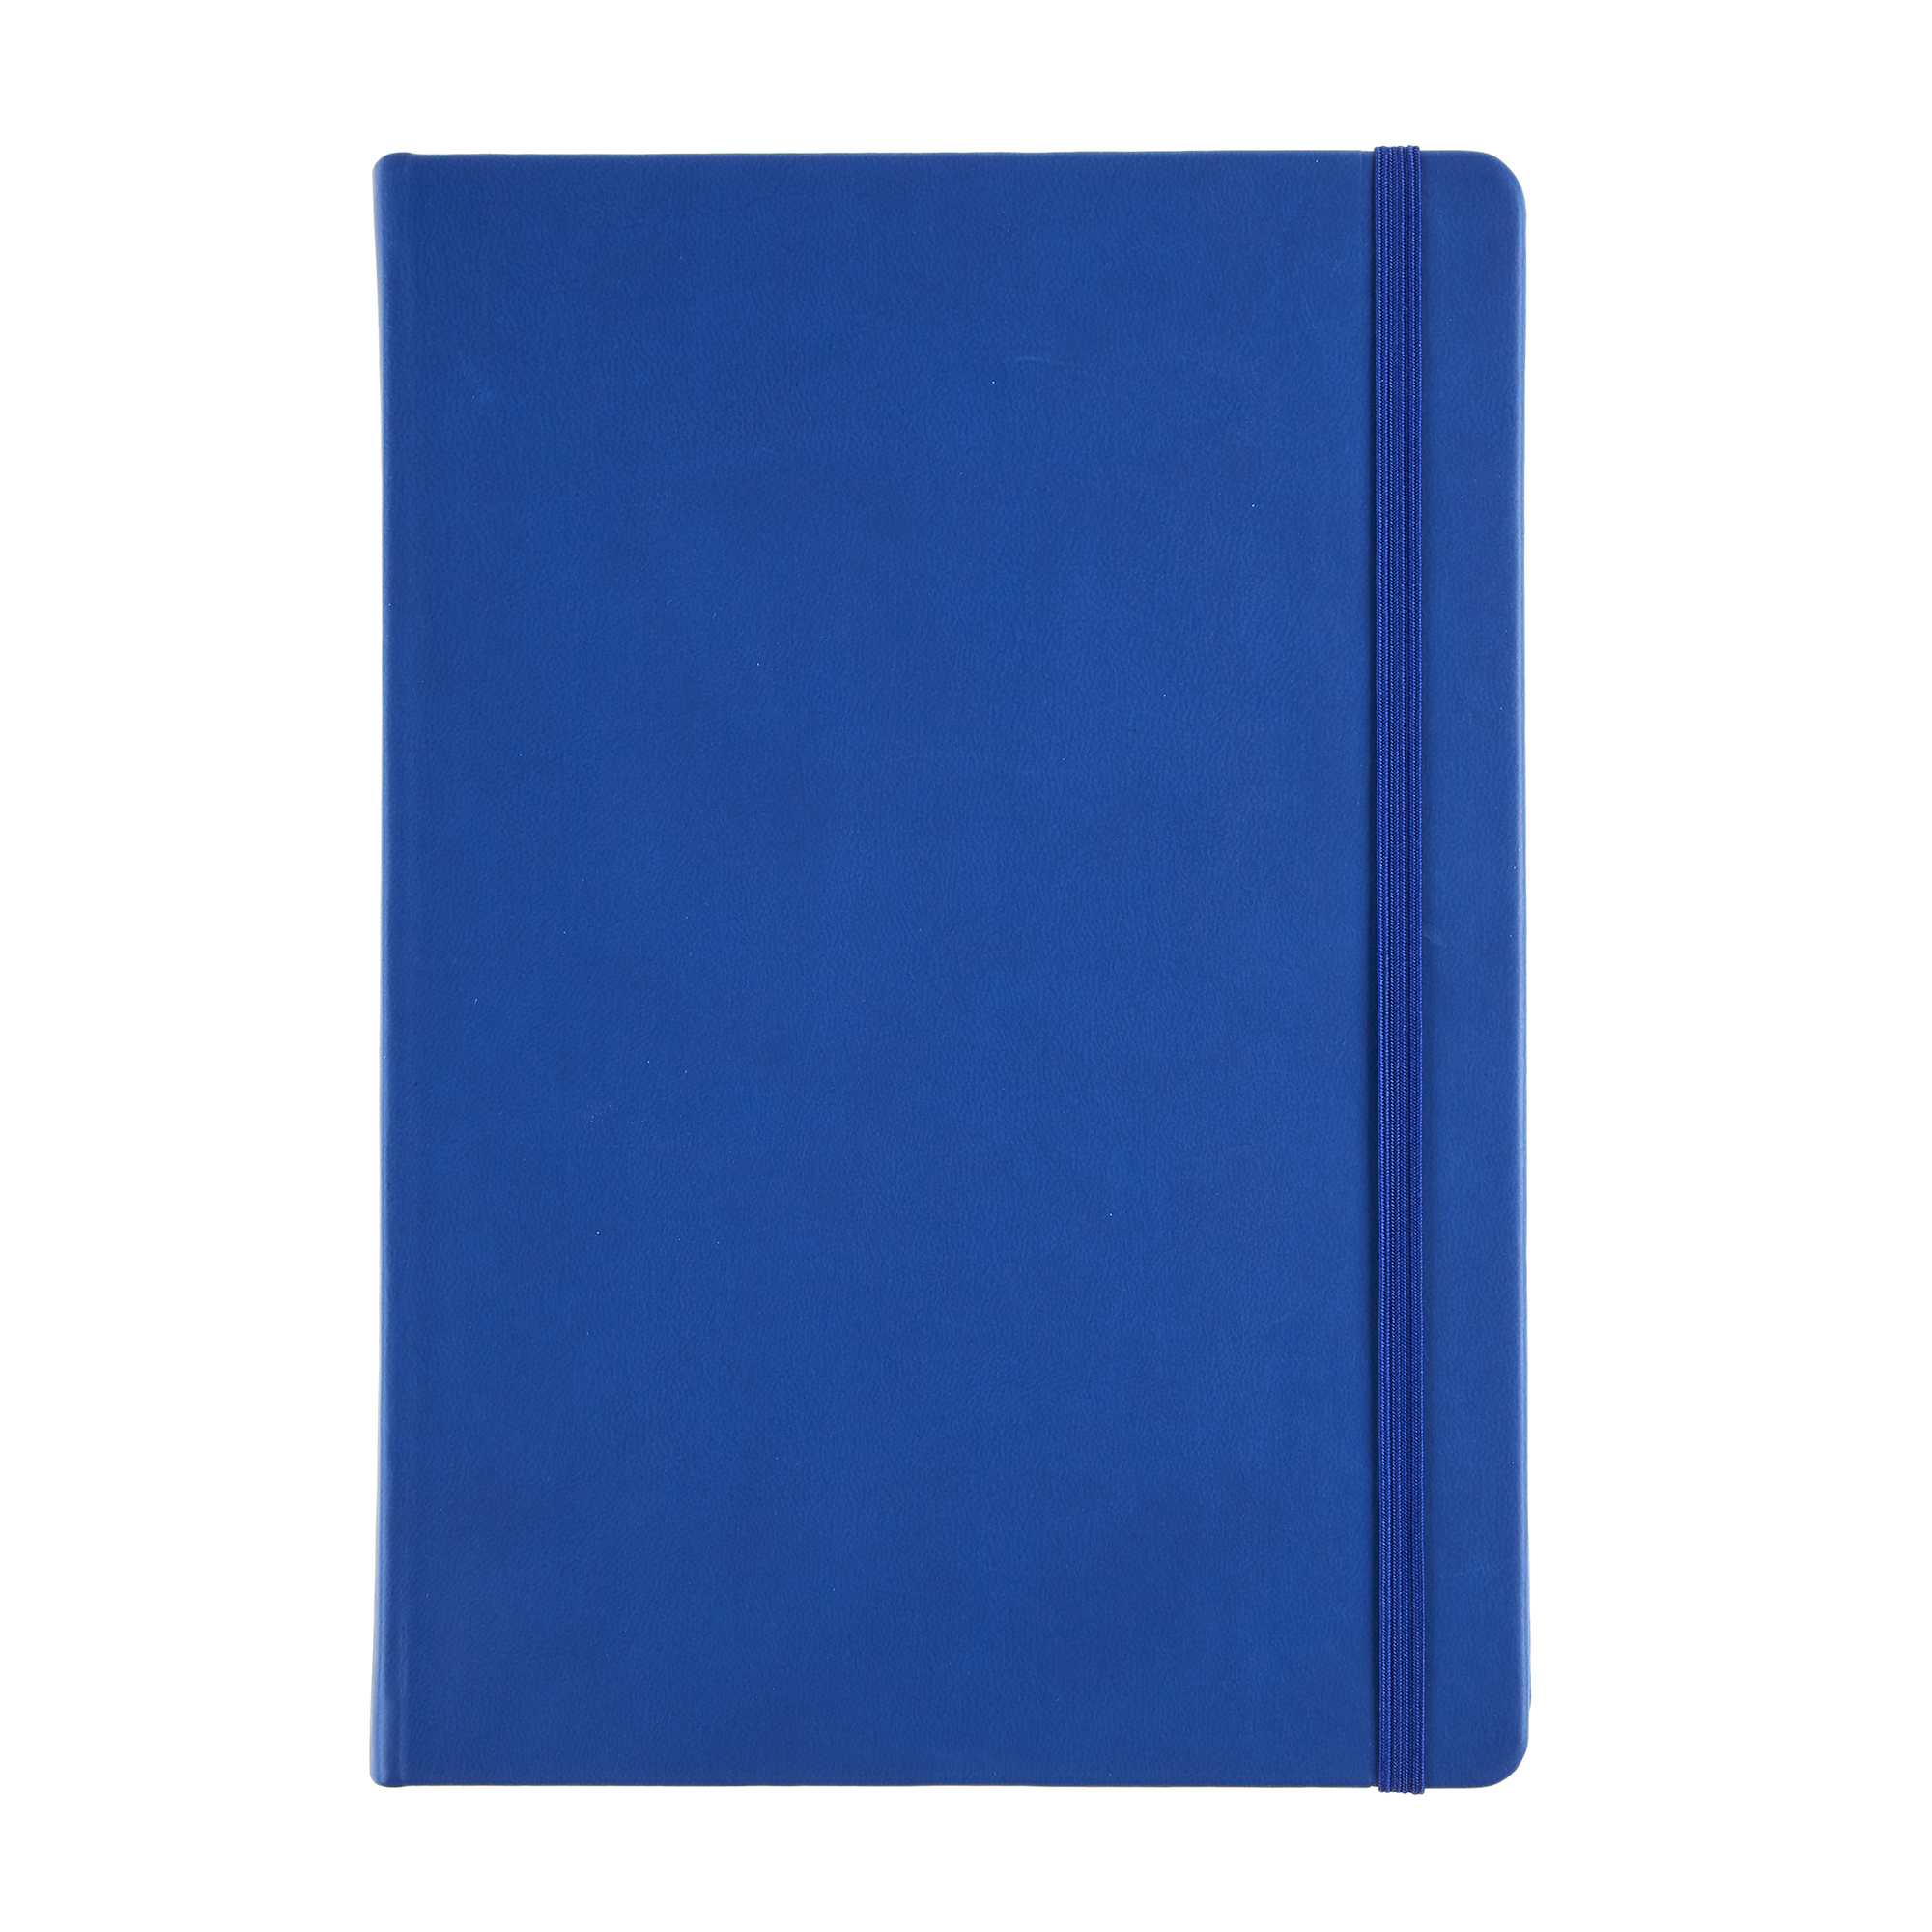 Collins Essential A5 Exercise Ruled Notebook 80 Pages Dark Blue